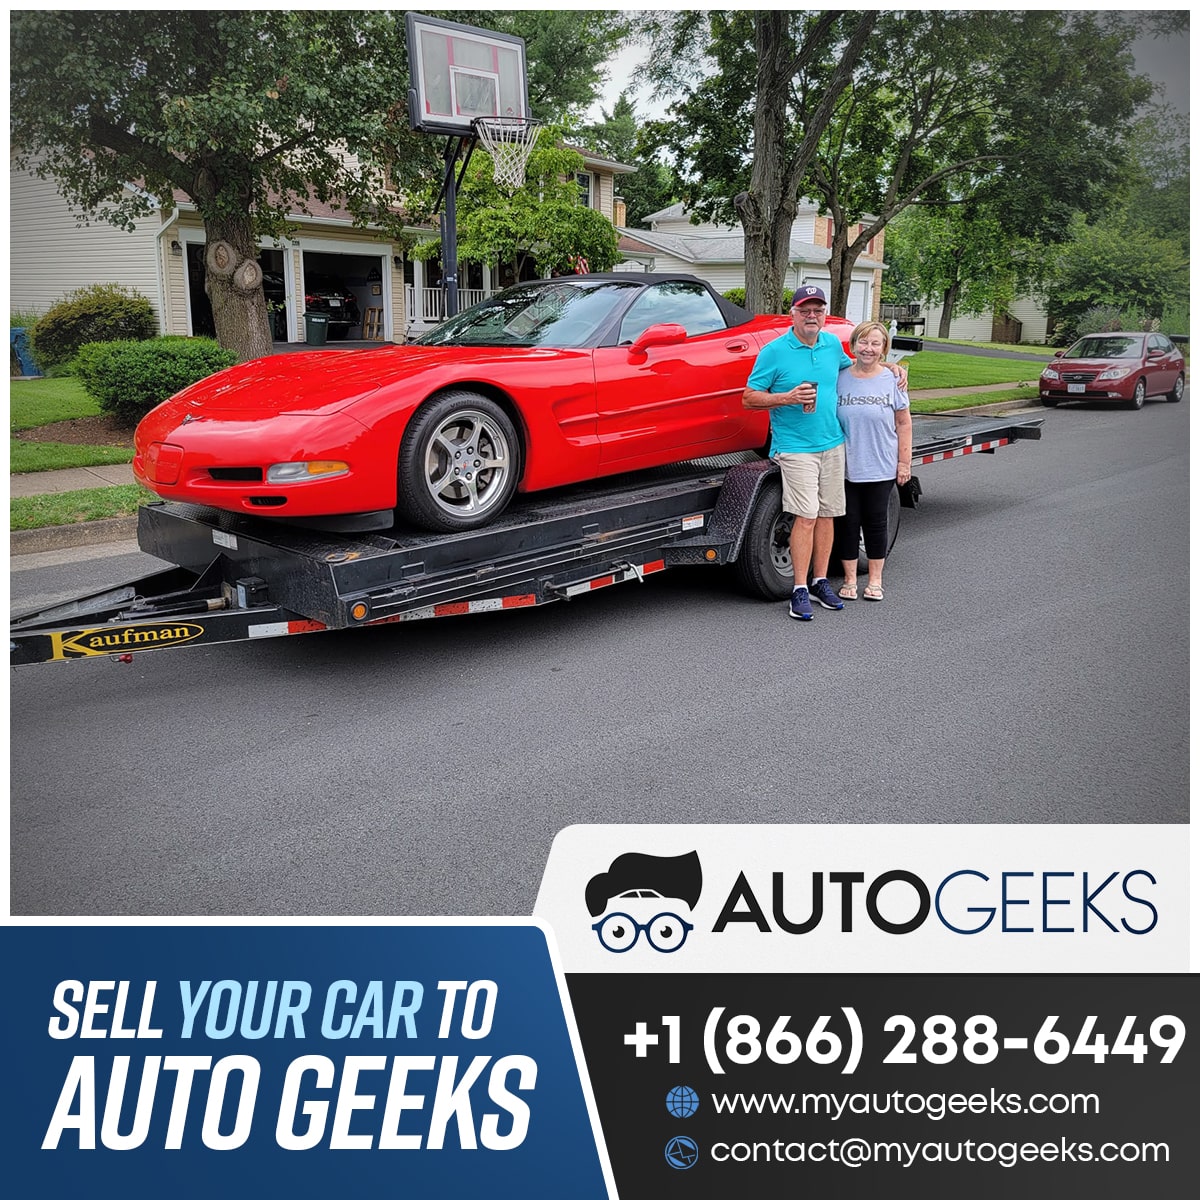 Auto Geeks - Sell Your Car Online